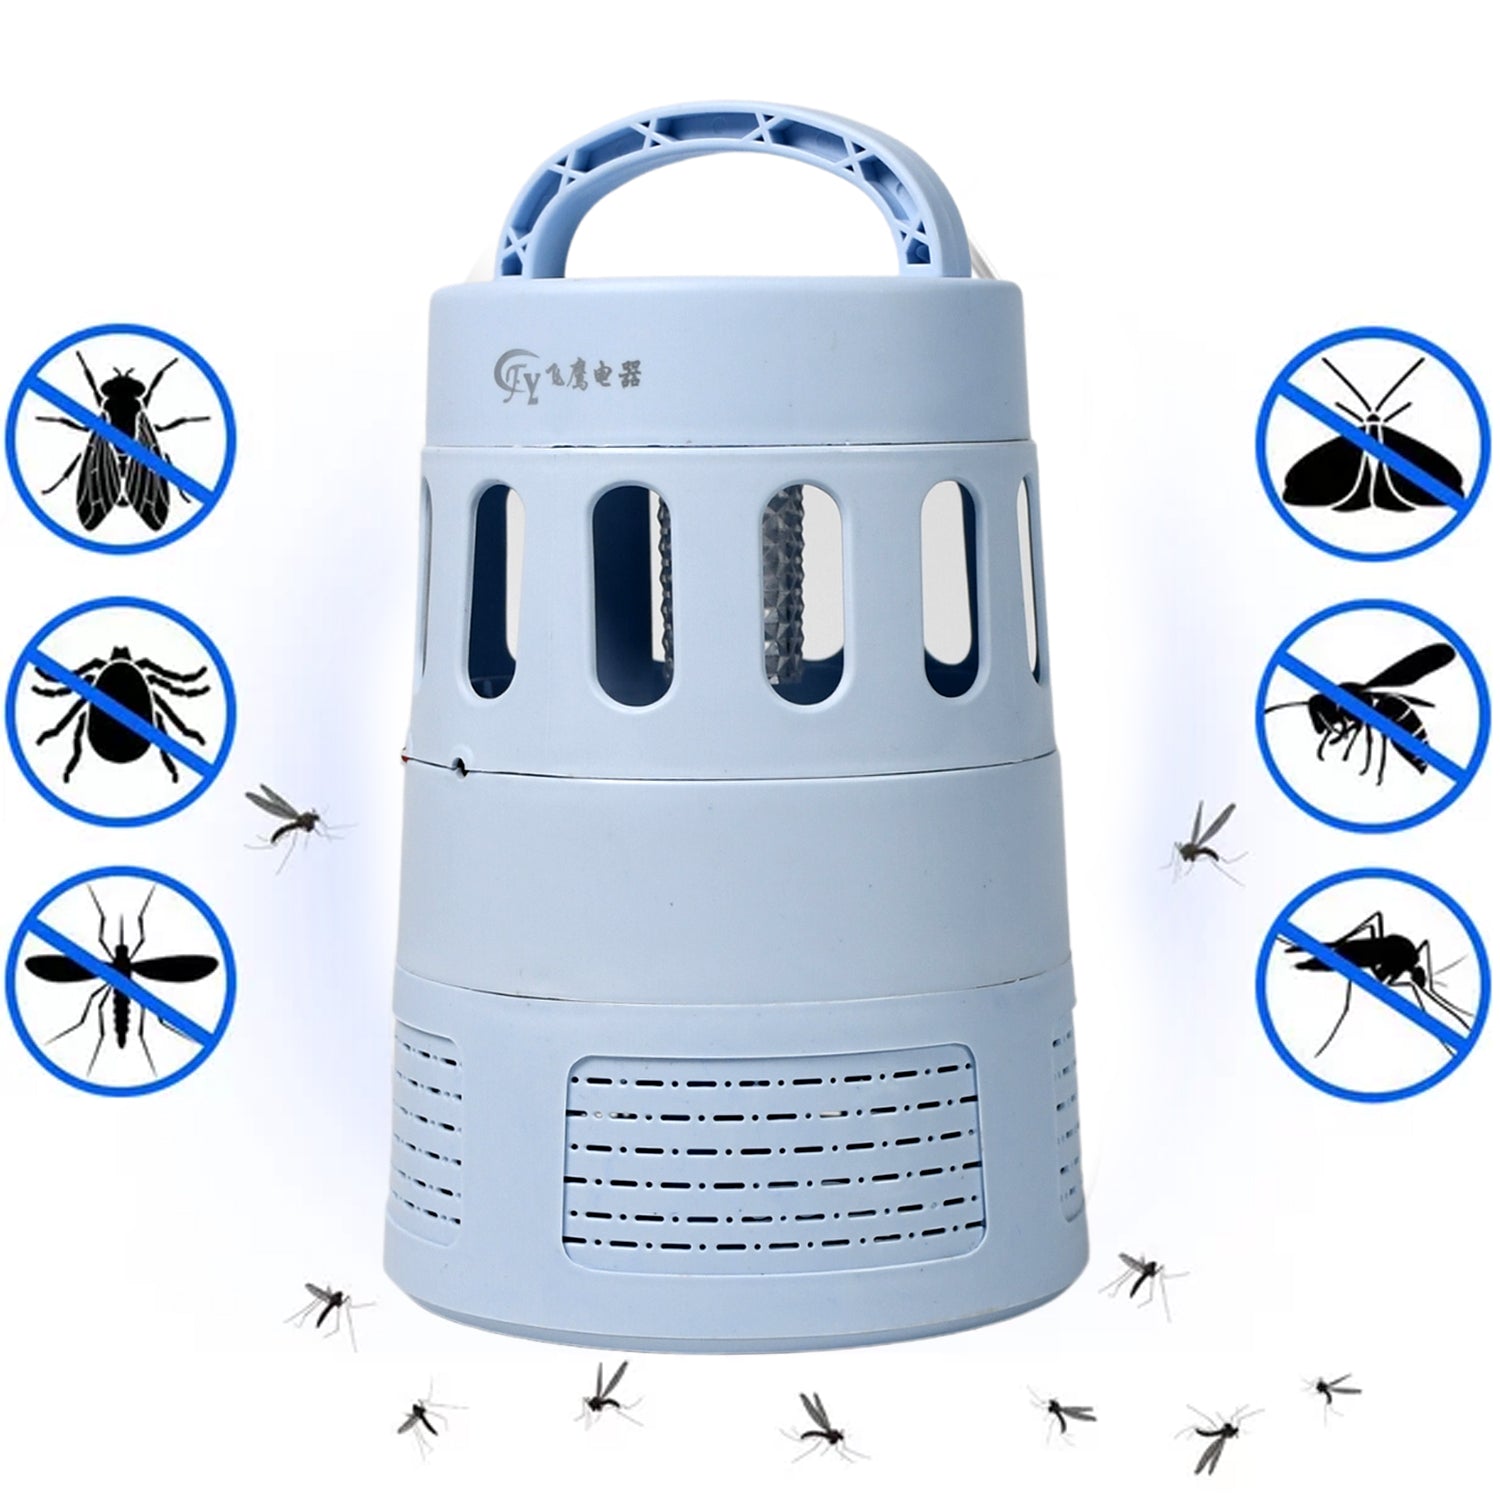 1476 Home Indoor Bedroom Mosquito Repellent Lamp Usb Plug-In No Radiation Baby Electric Trap USB Charging 